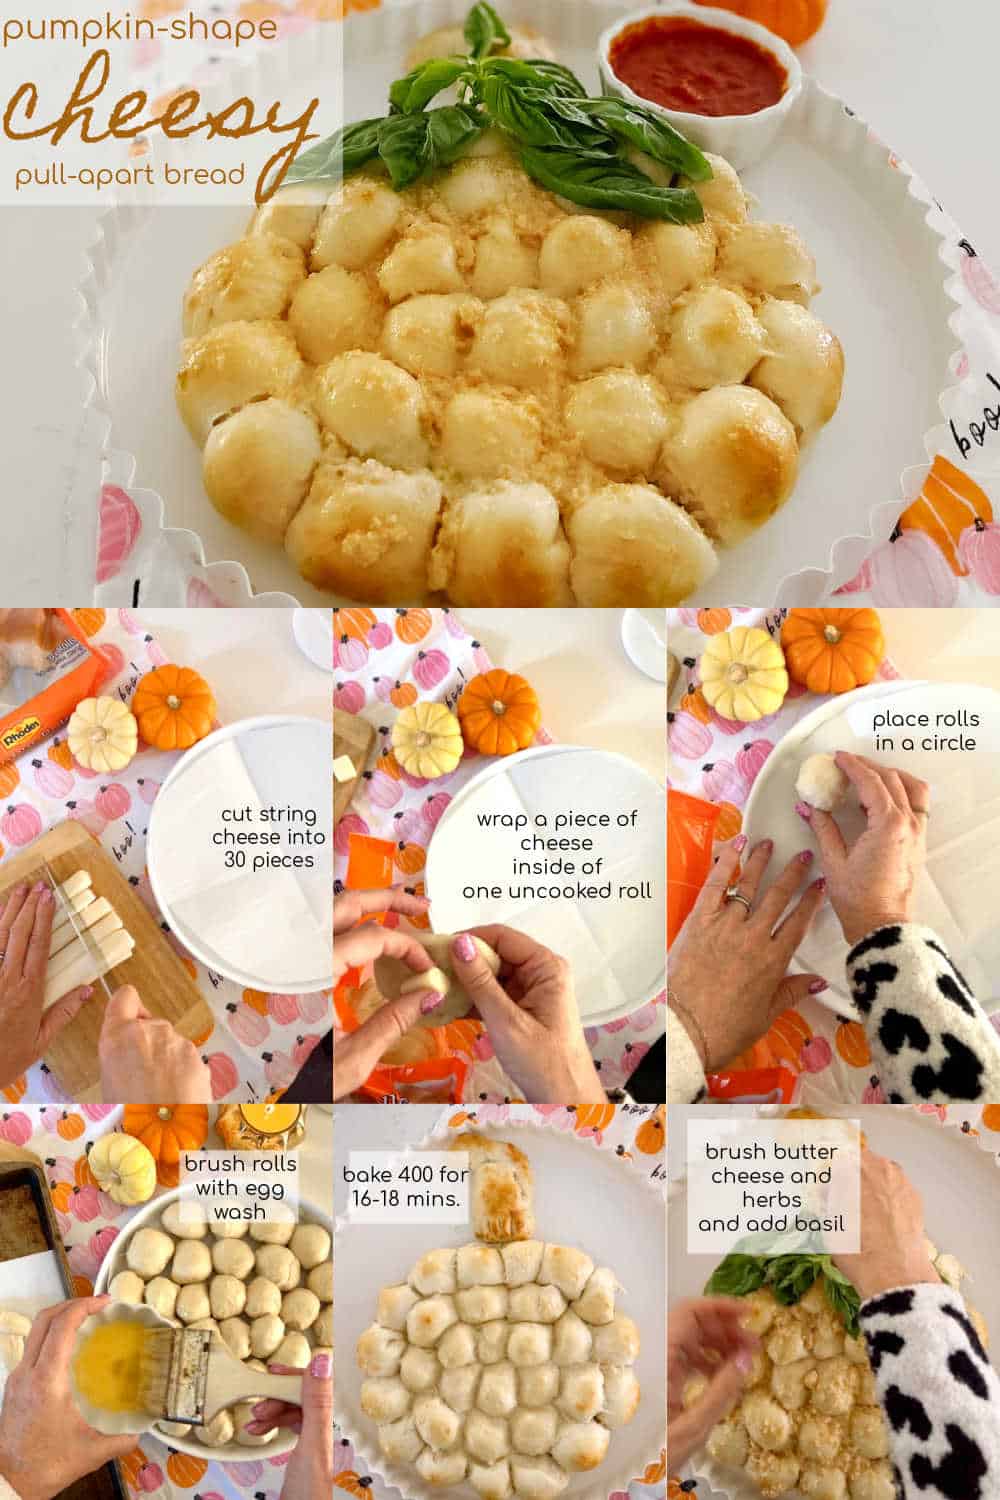 Pumpkin-Shaped Cheesy Pull Apart Bread. Halloween treats don't have to be sweet. Make a batch of this cheesy pull apart bread as an appetizer or to have with spaghetti! 